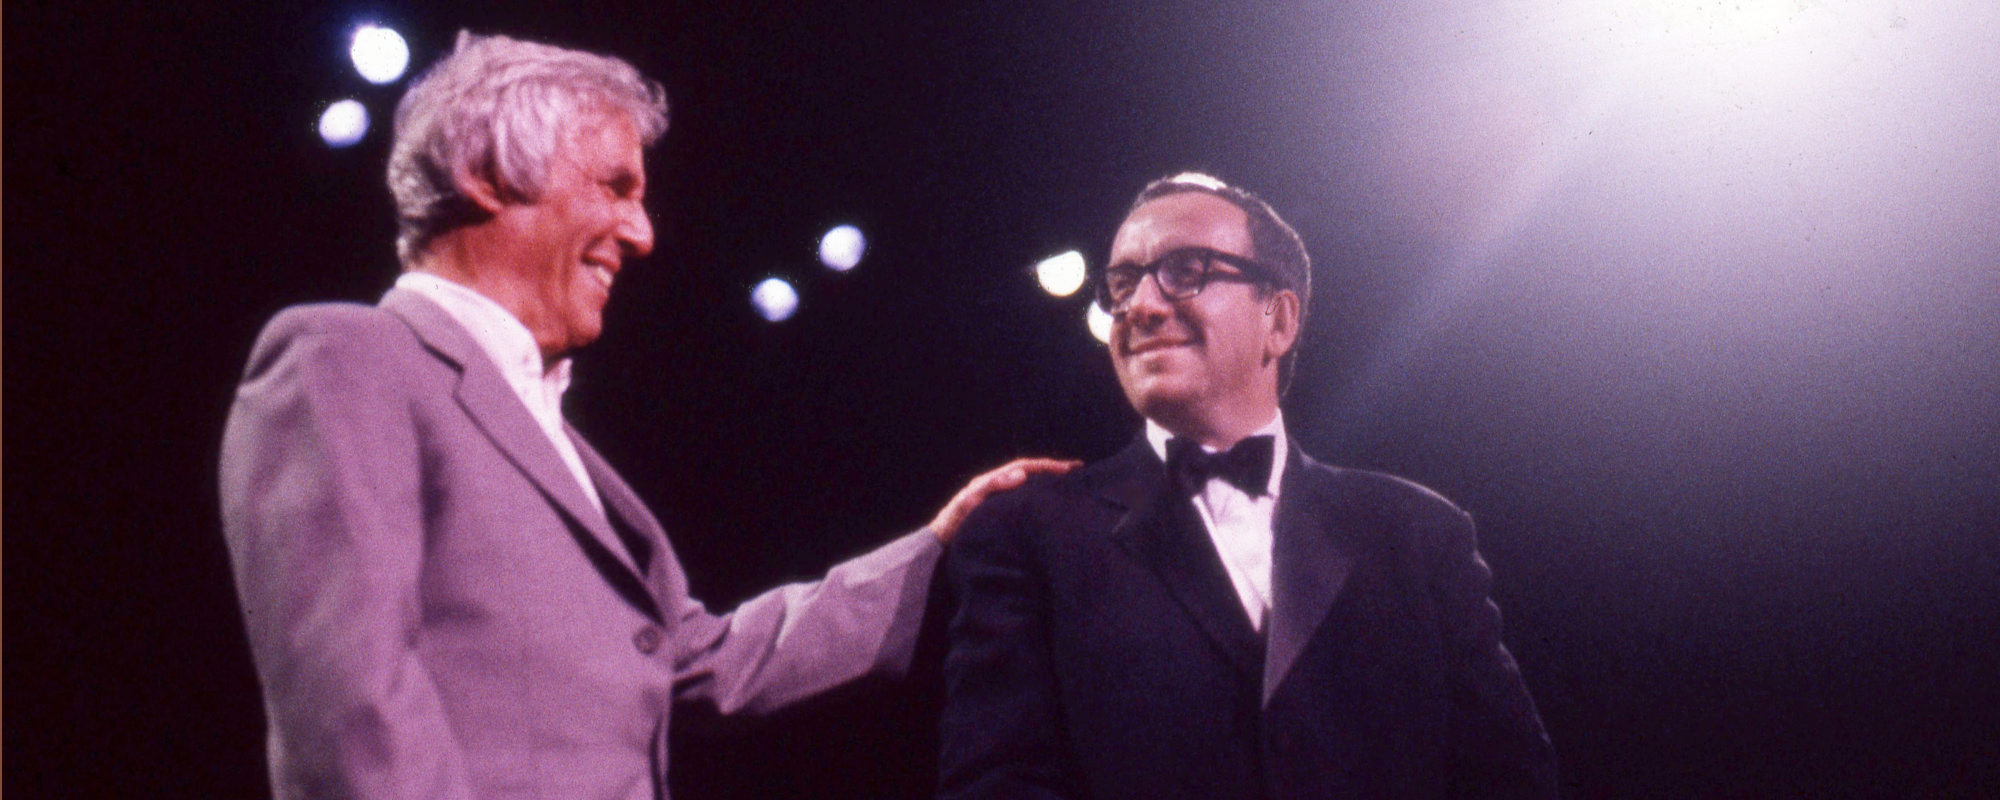 Review: Burt Bacharach and Elvis Costello Paint the Music of Memory